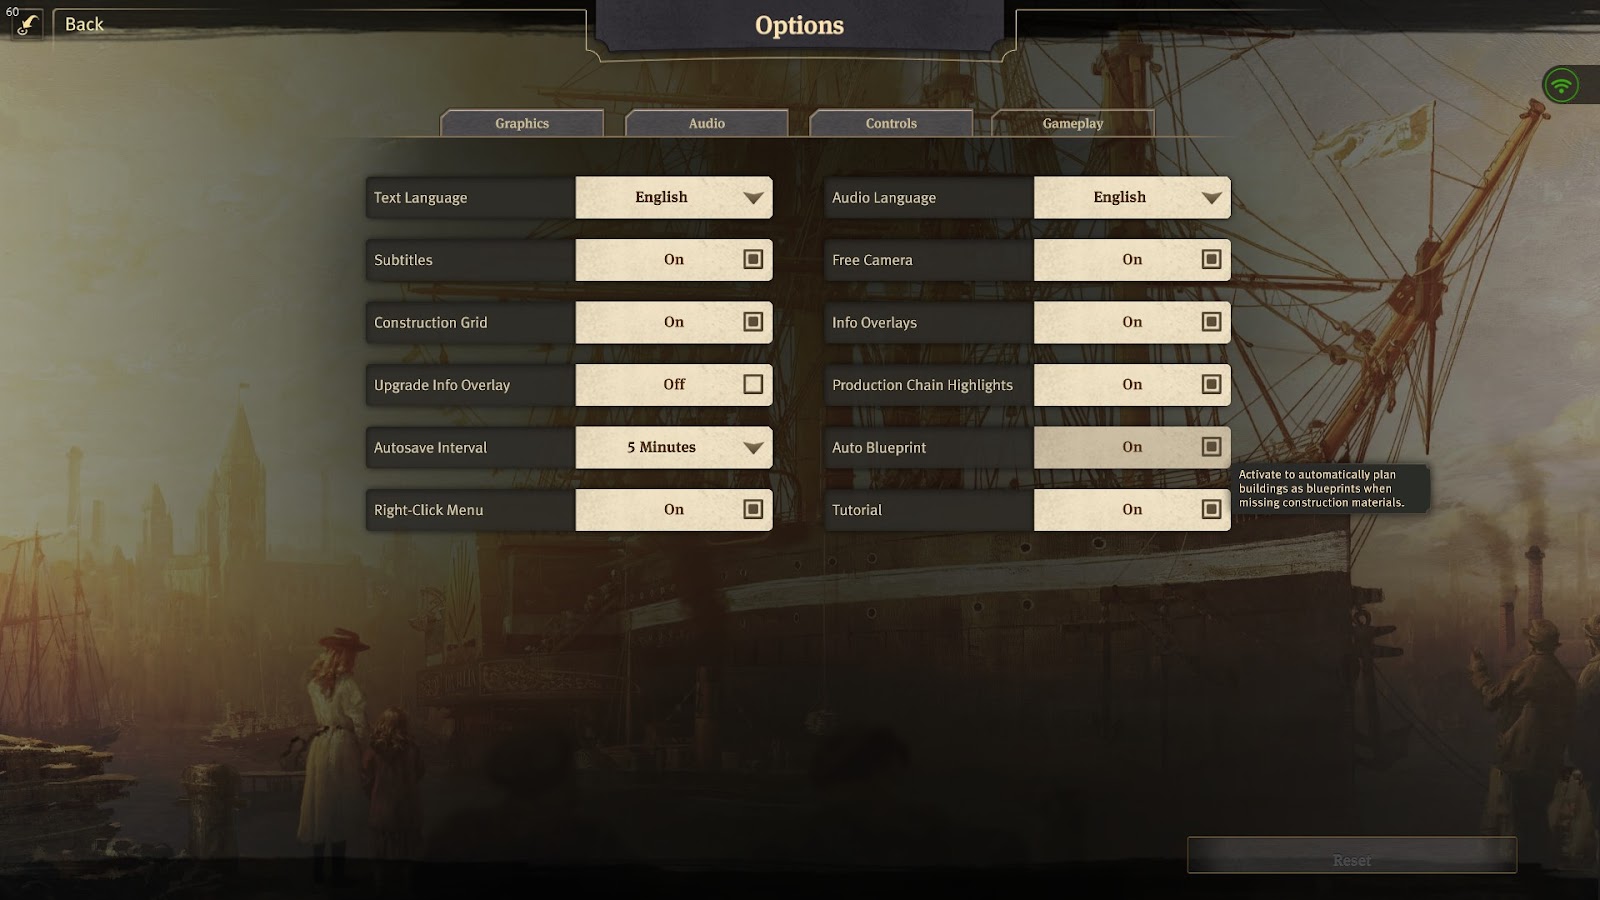 Subtitles on-off, text language, right-click menu and some other options